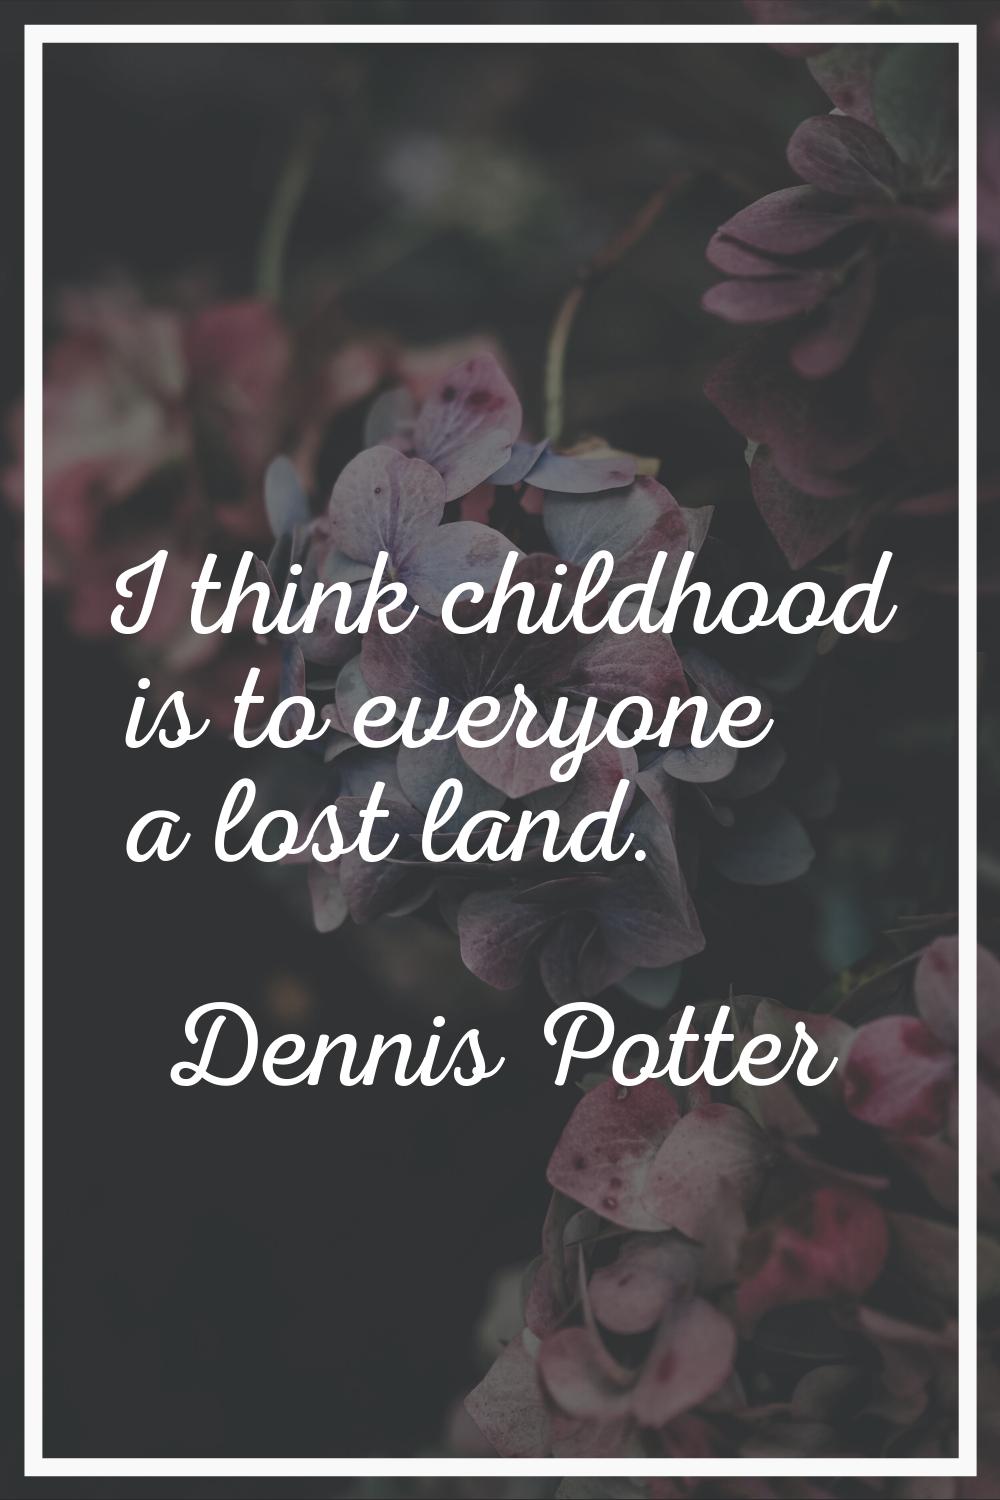 I think childhood is to everyone a lost land.